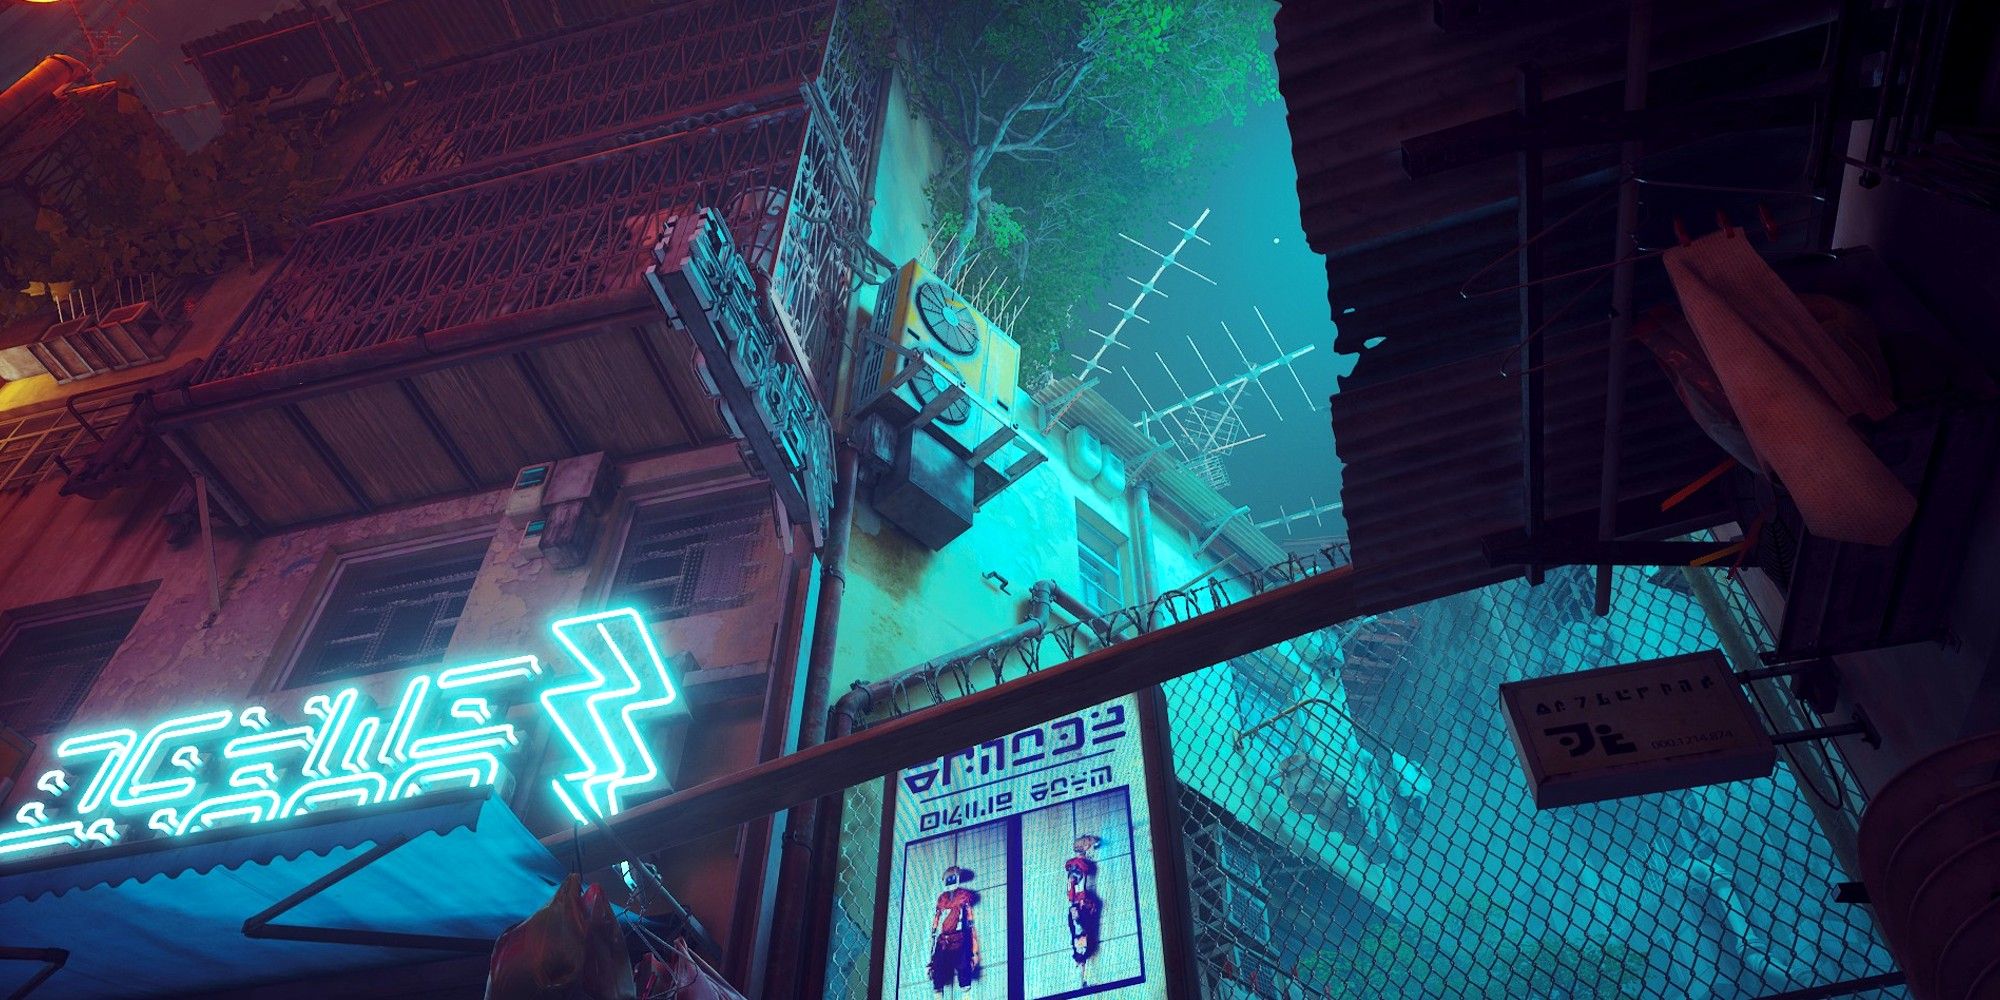 Stray Alleyway Scene With Neon Lights, Signs, And Fence